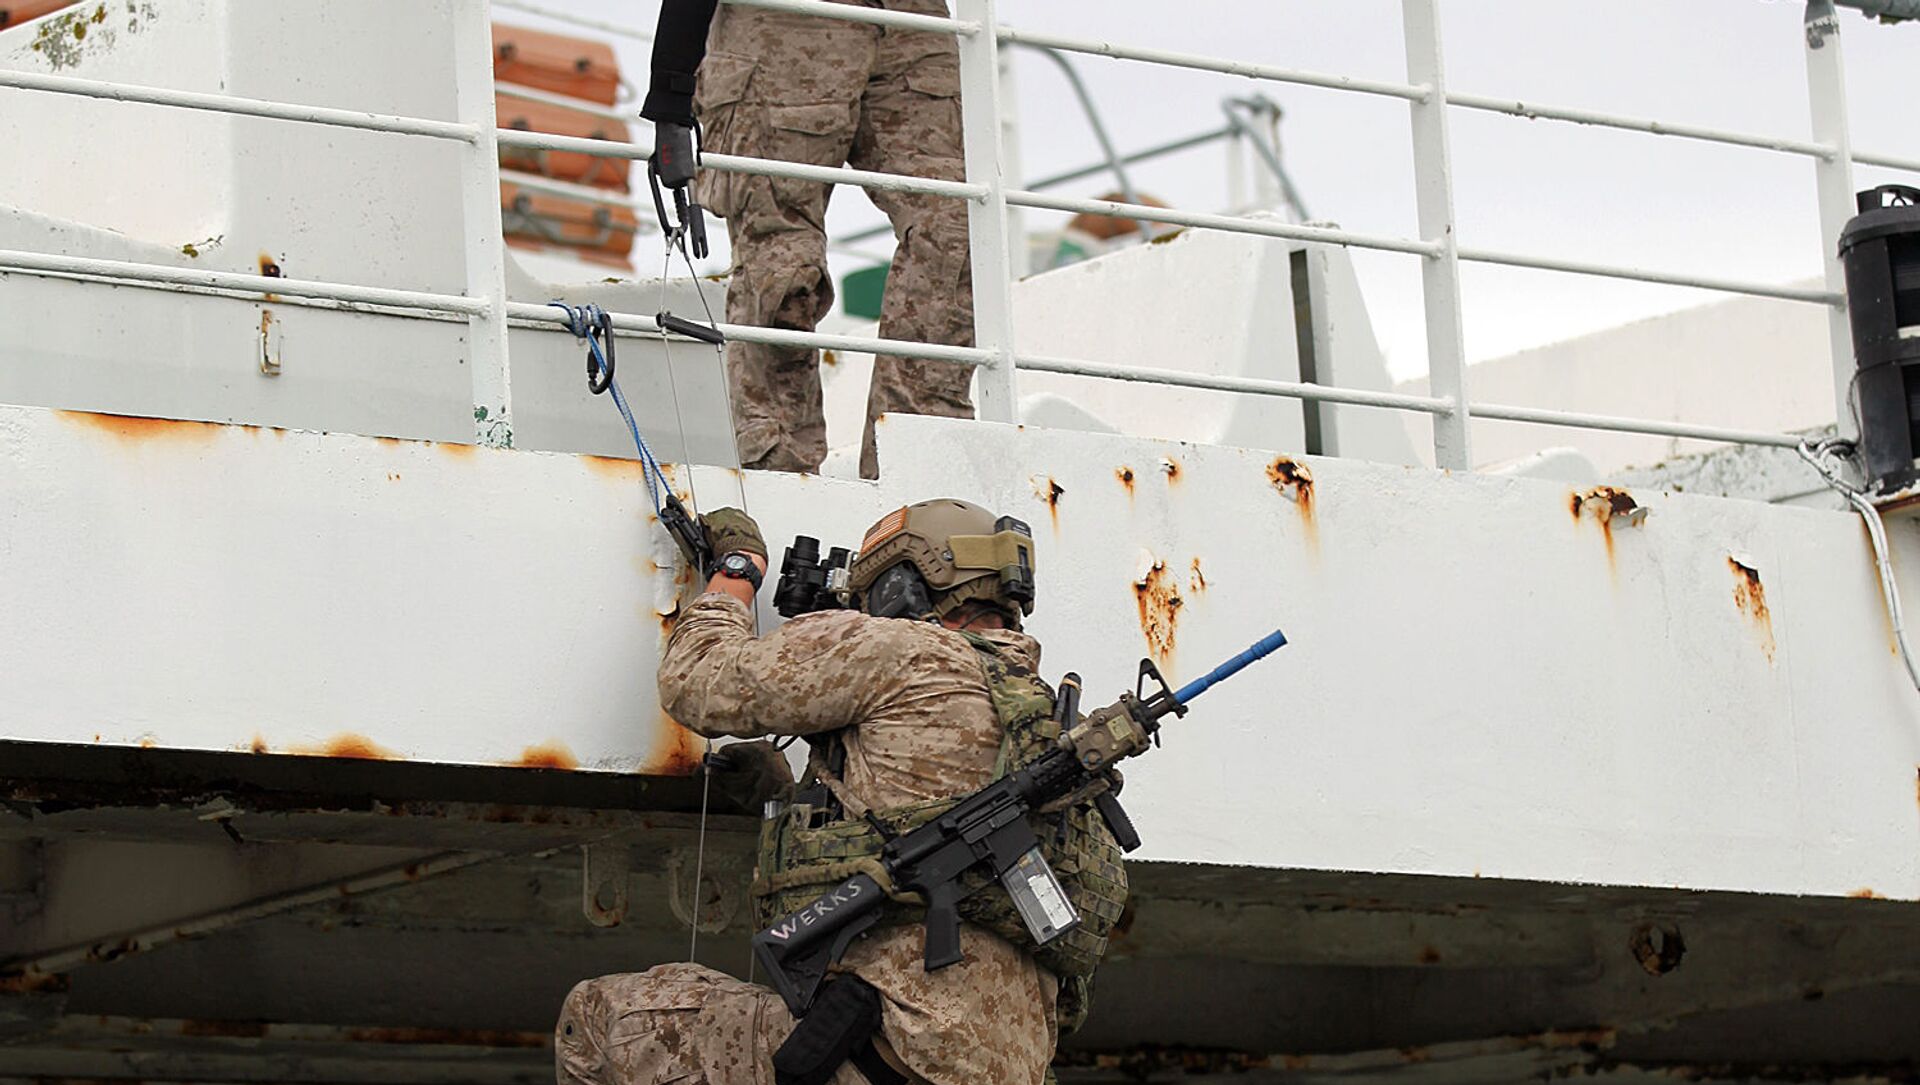 Sailors with the US Naval Special Warfare Unit 2 climb a ladder to reach the second floor of a ship in Lisbon, Portugal on October 24, 2015 during NATO exercise Trident Juncture 15 - Sputnik International, 1920, 18.02.2021